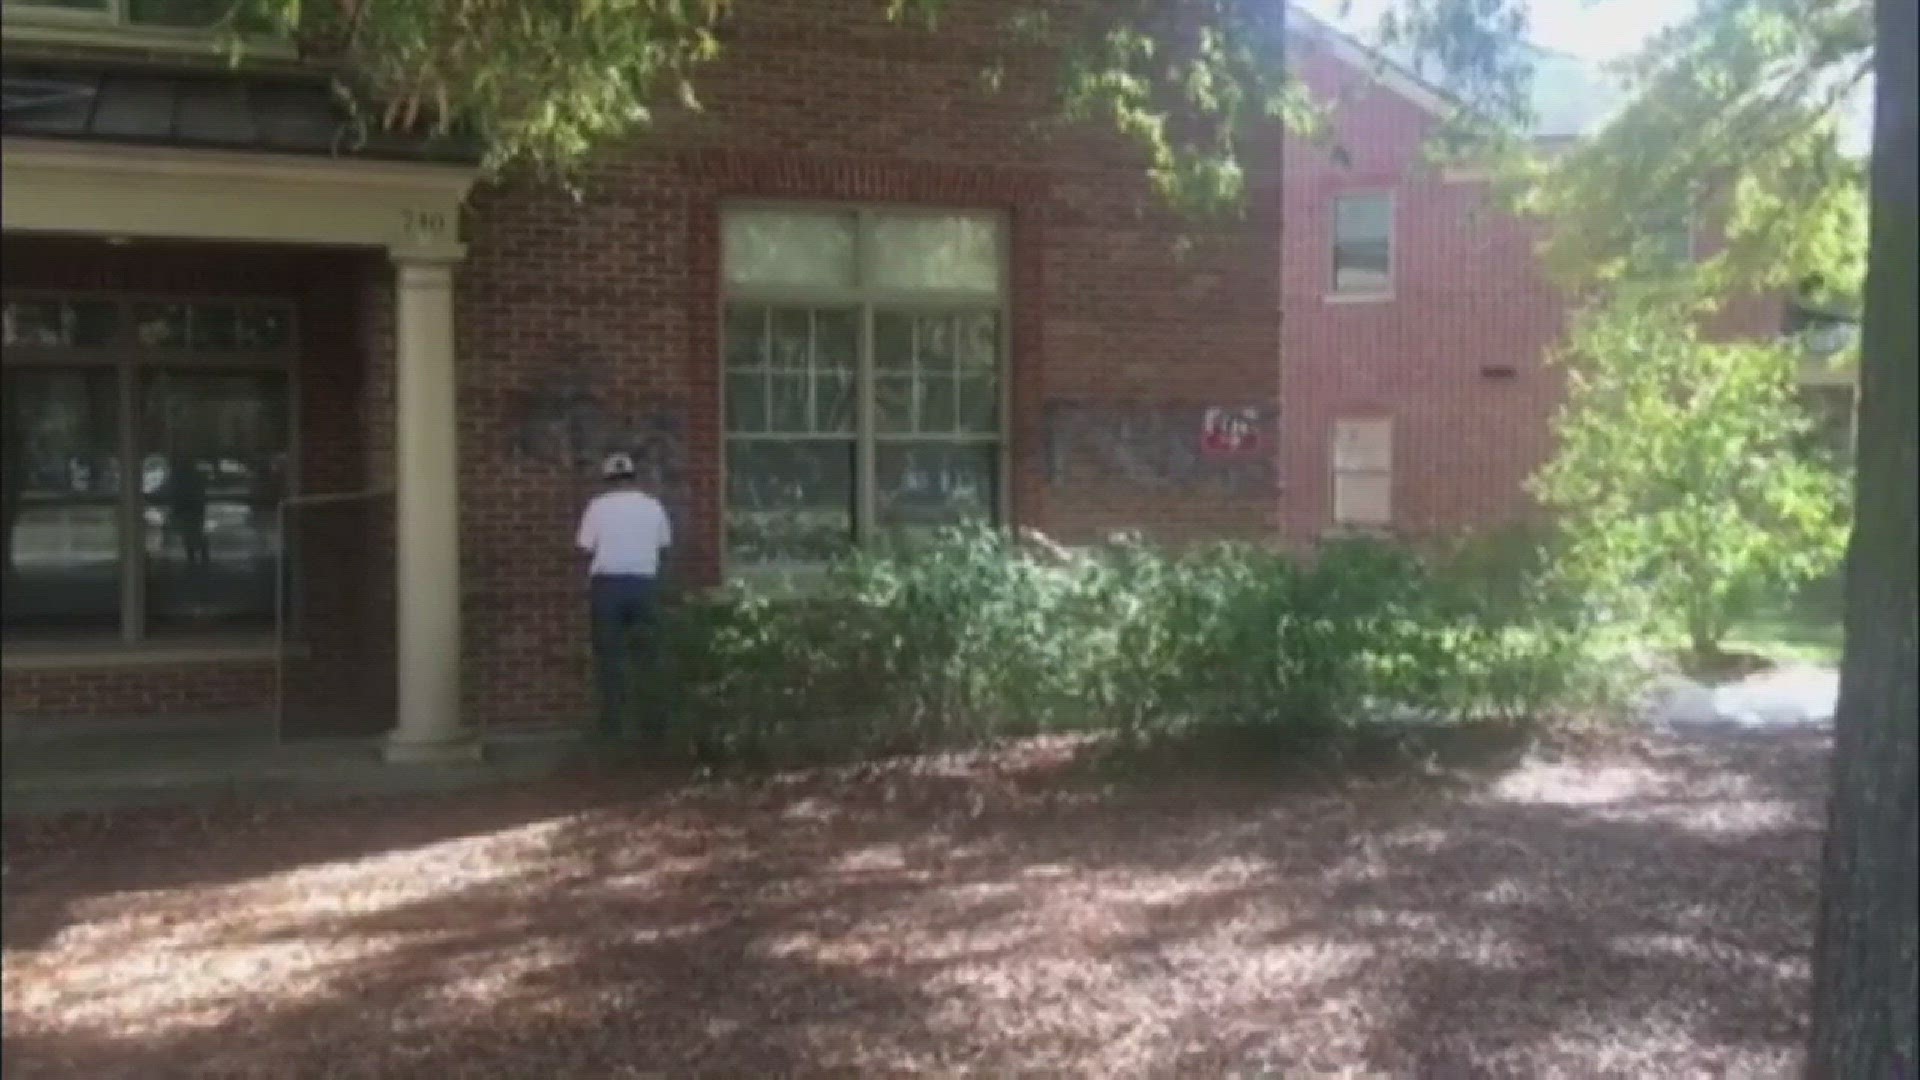 Crews remove graffiti that was spray-painted onto fraternity houses at the College of William & Mary.